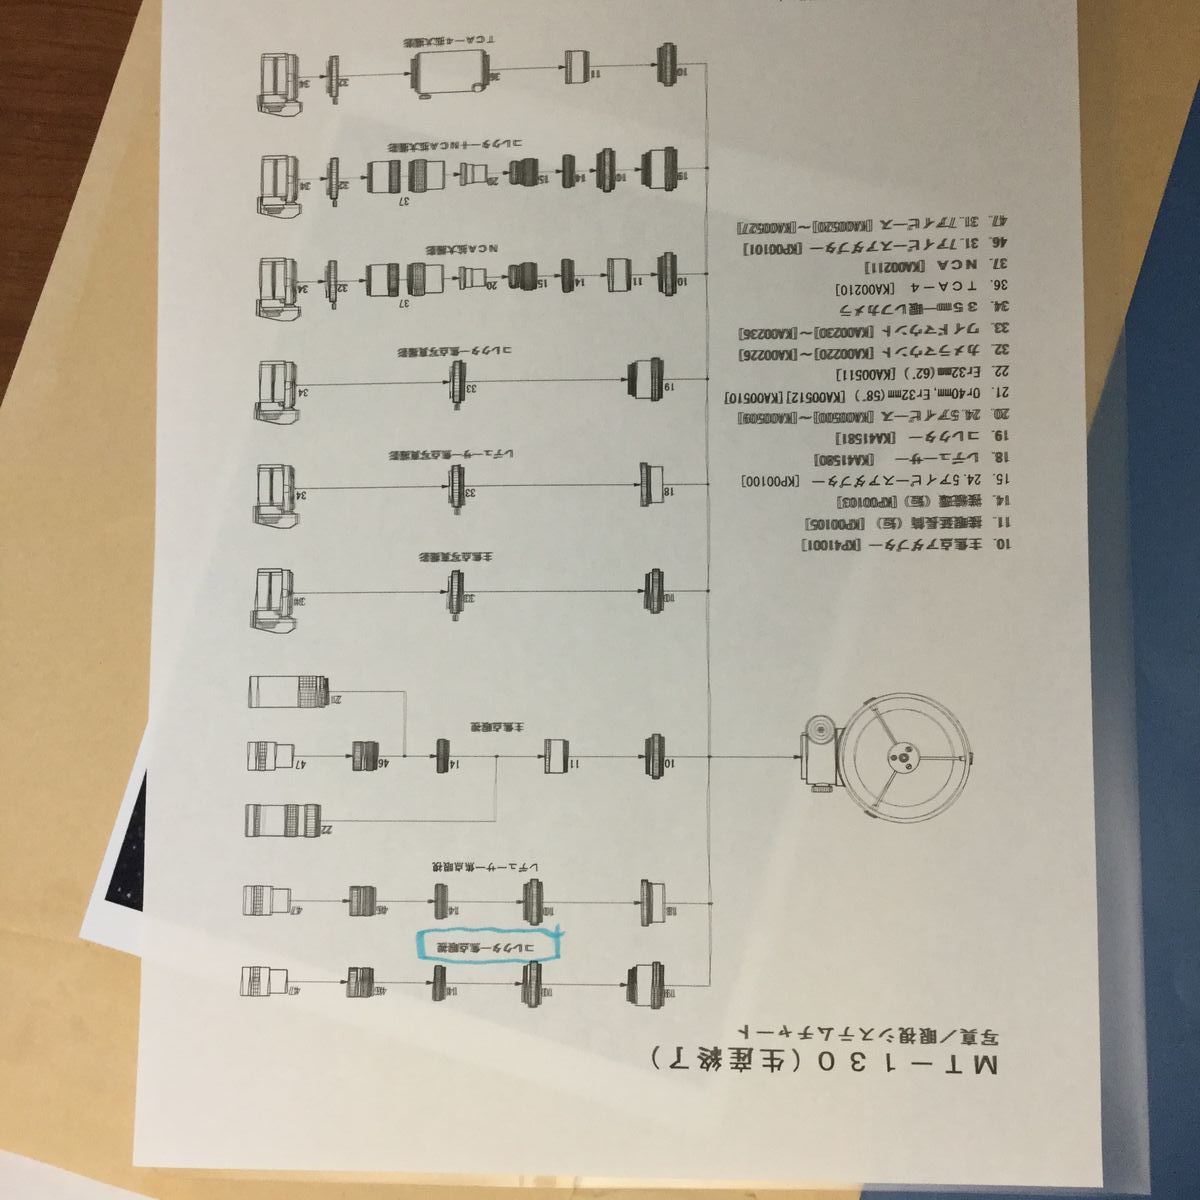 Mt130 system chart in japanese